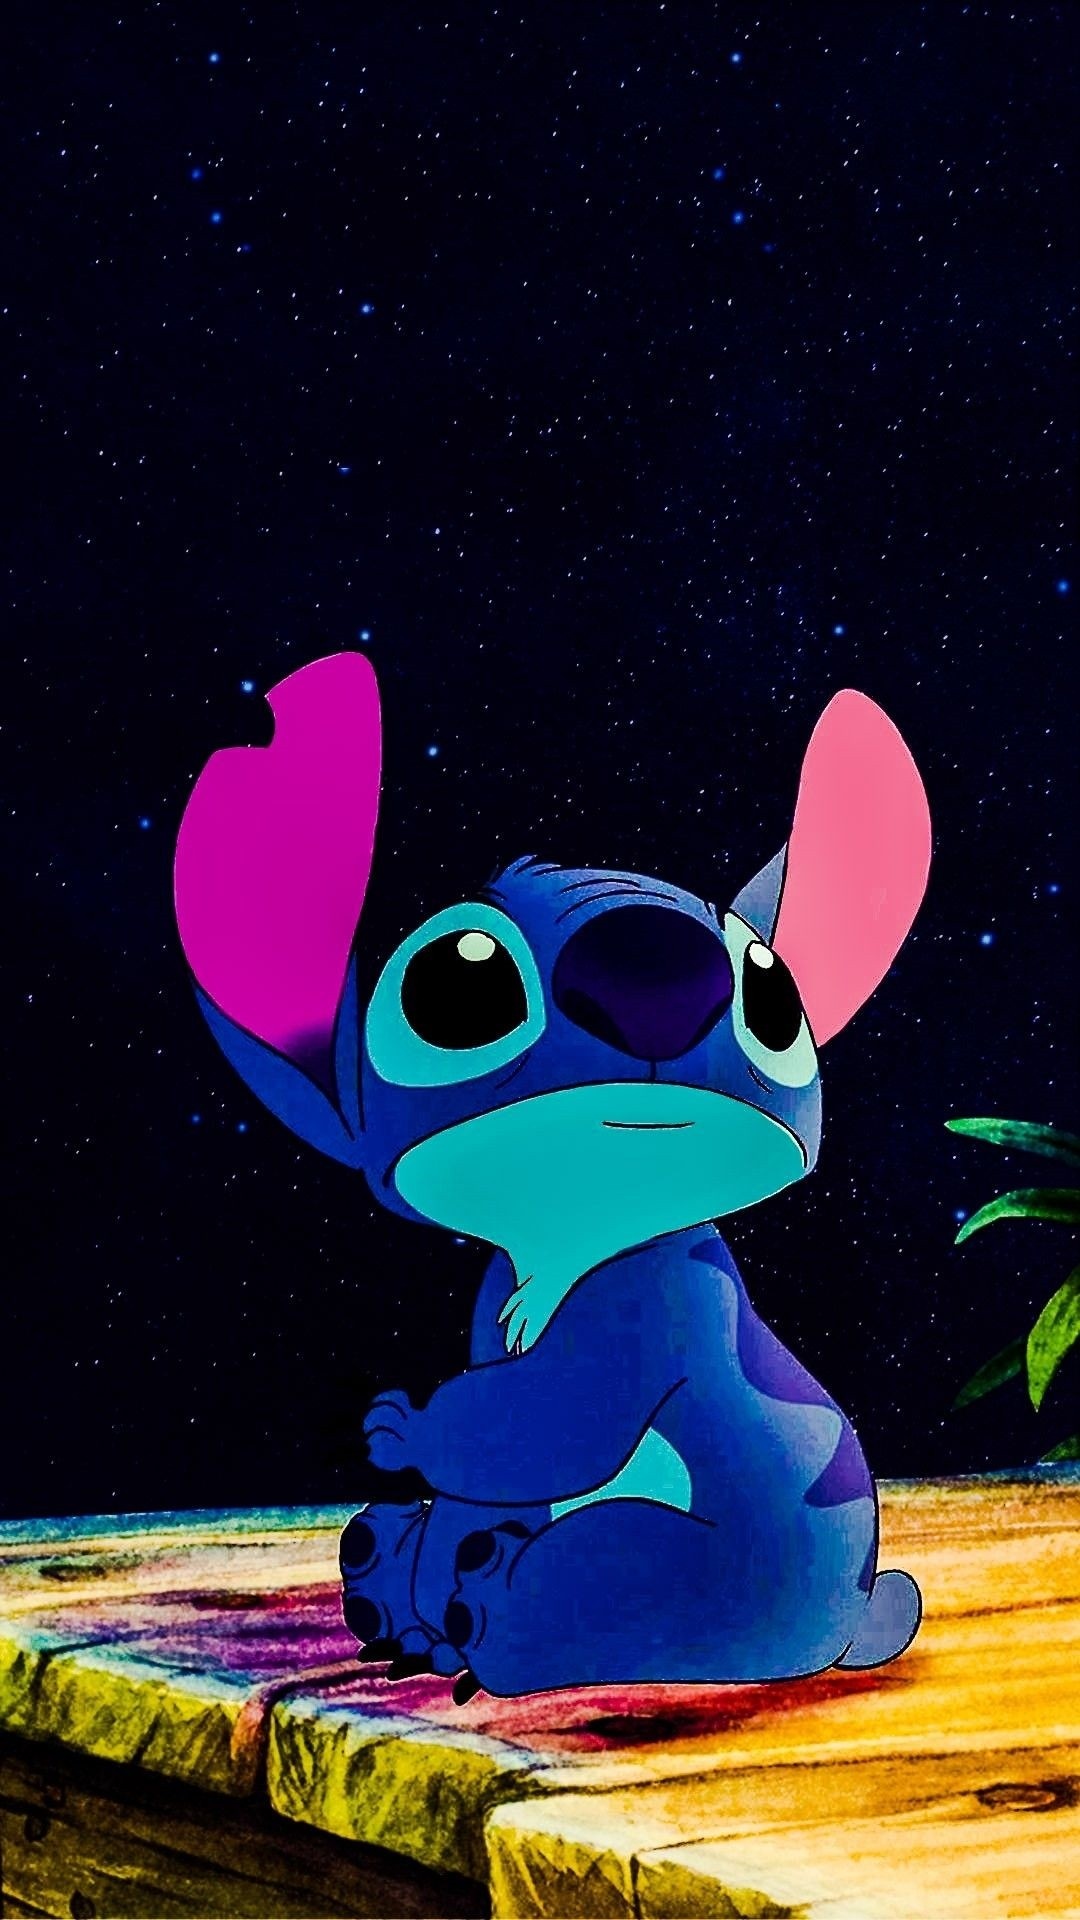 Stitch animation, Stitch iPhone wallpapers, Adorable blue creature, Fan art, 1080x1920 Full HD Handy